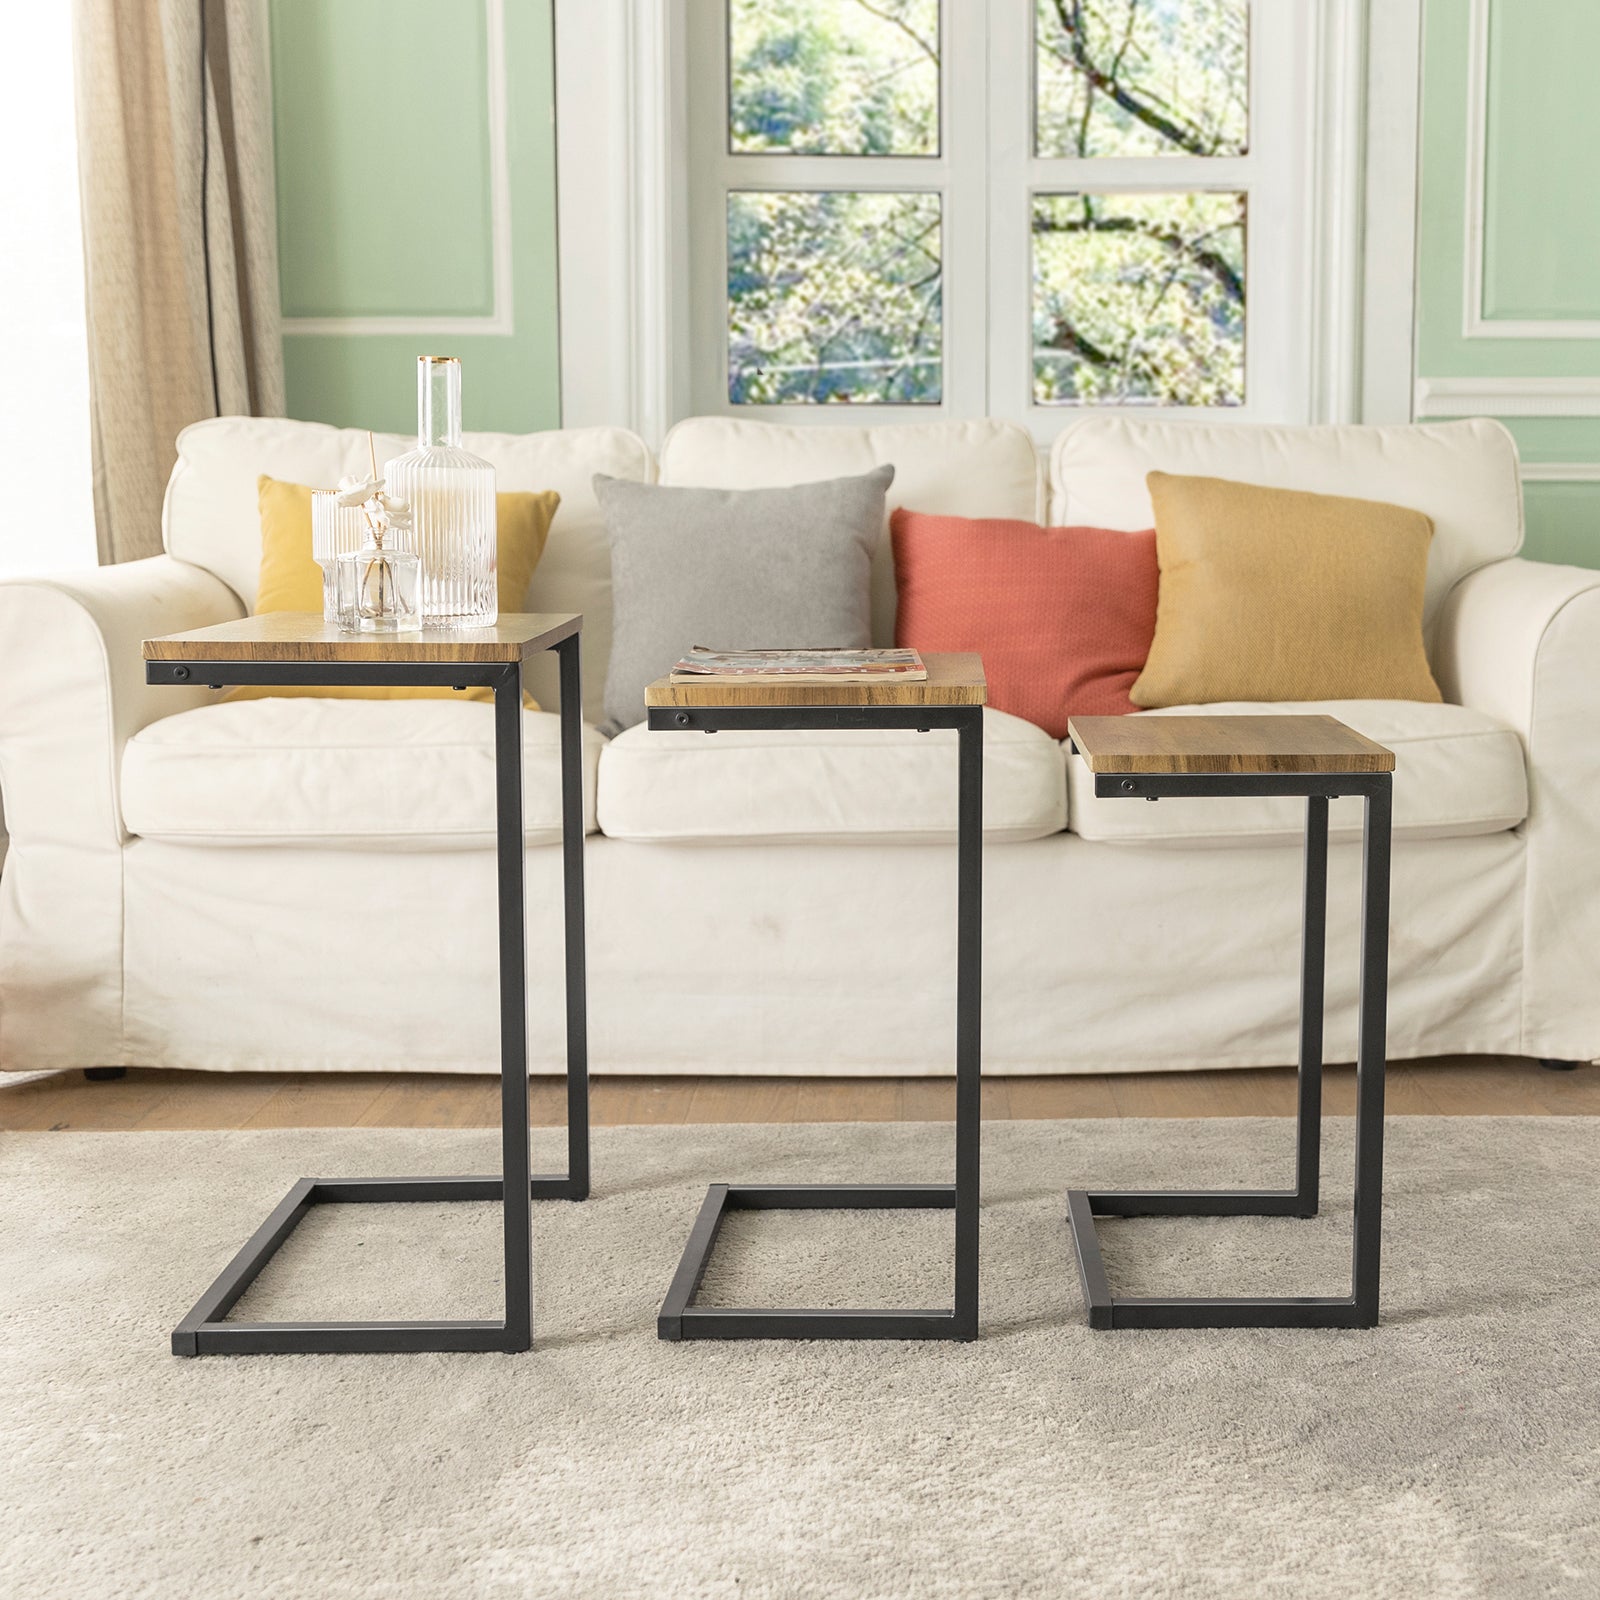 SoBuy FBT102-F Nesting Tables Set of 3 Coffee Tables Living Room Stacking Side Tables